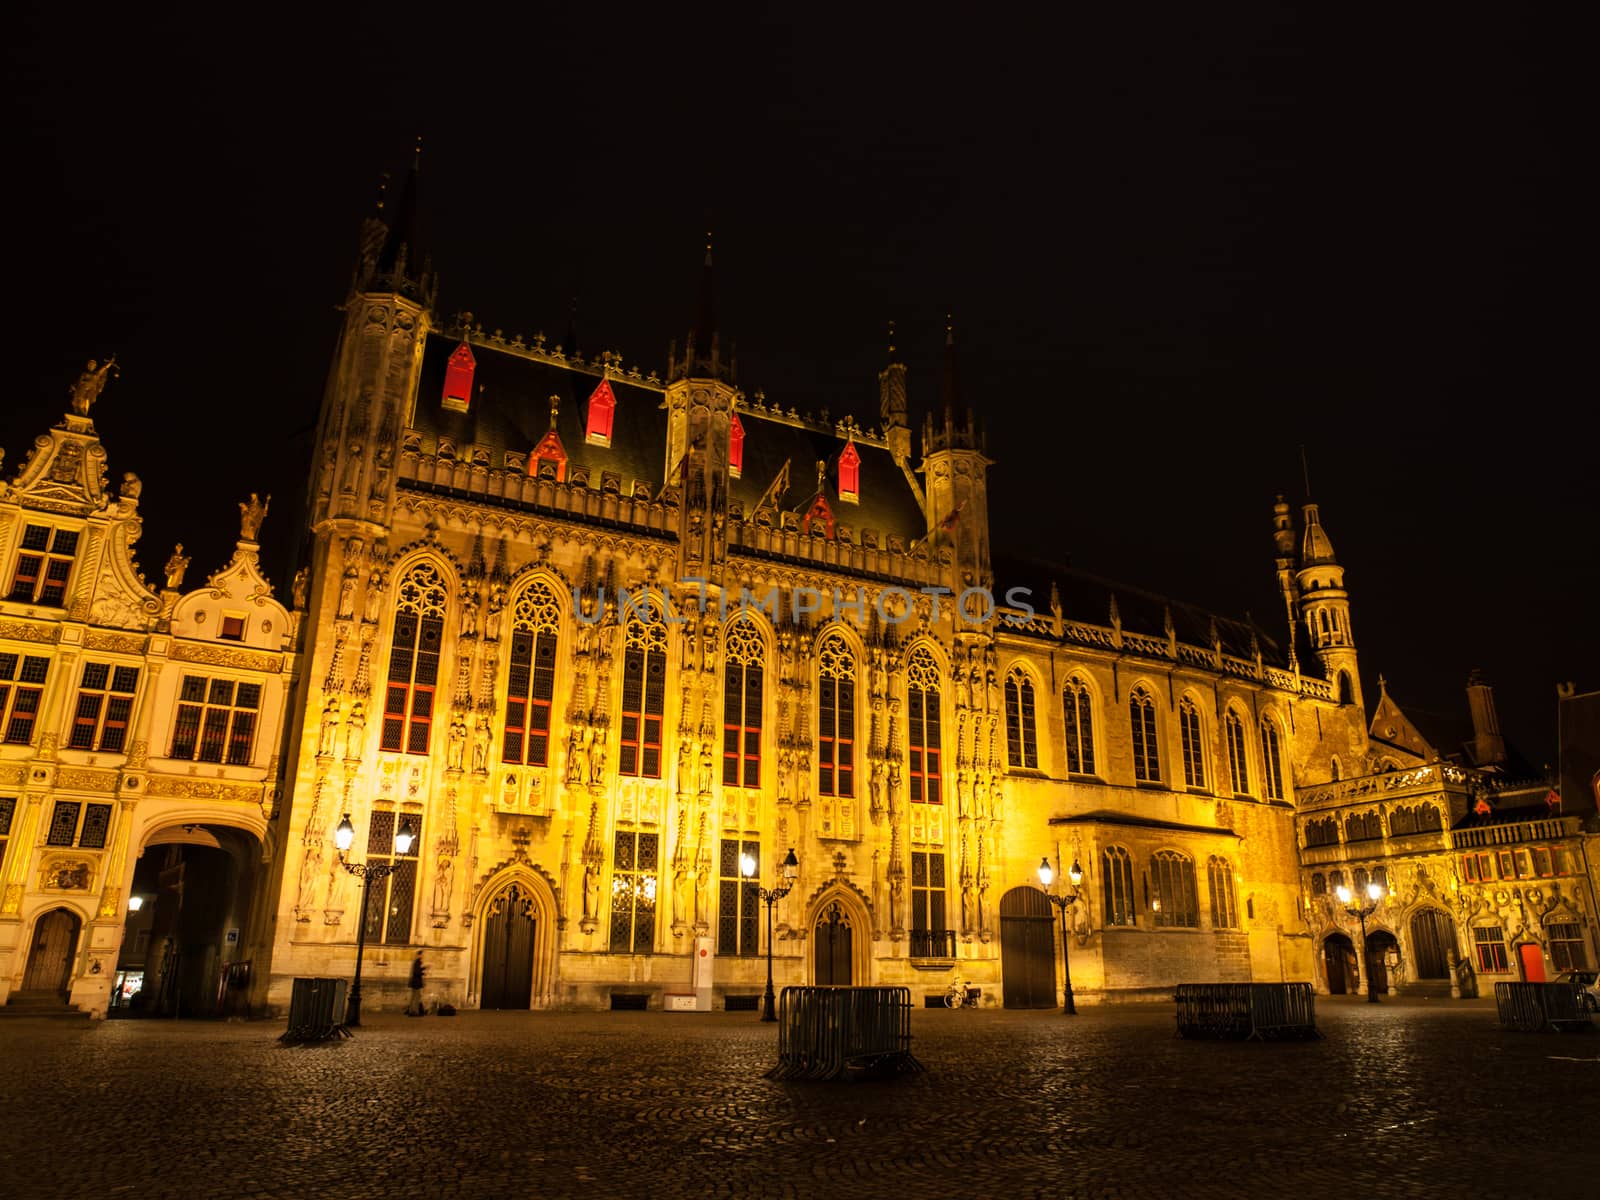 Burg square with the City Hall by night, Bruges, Belgium